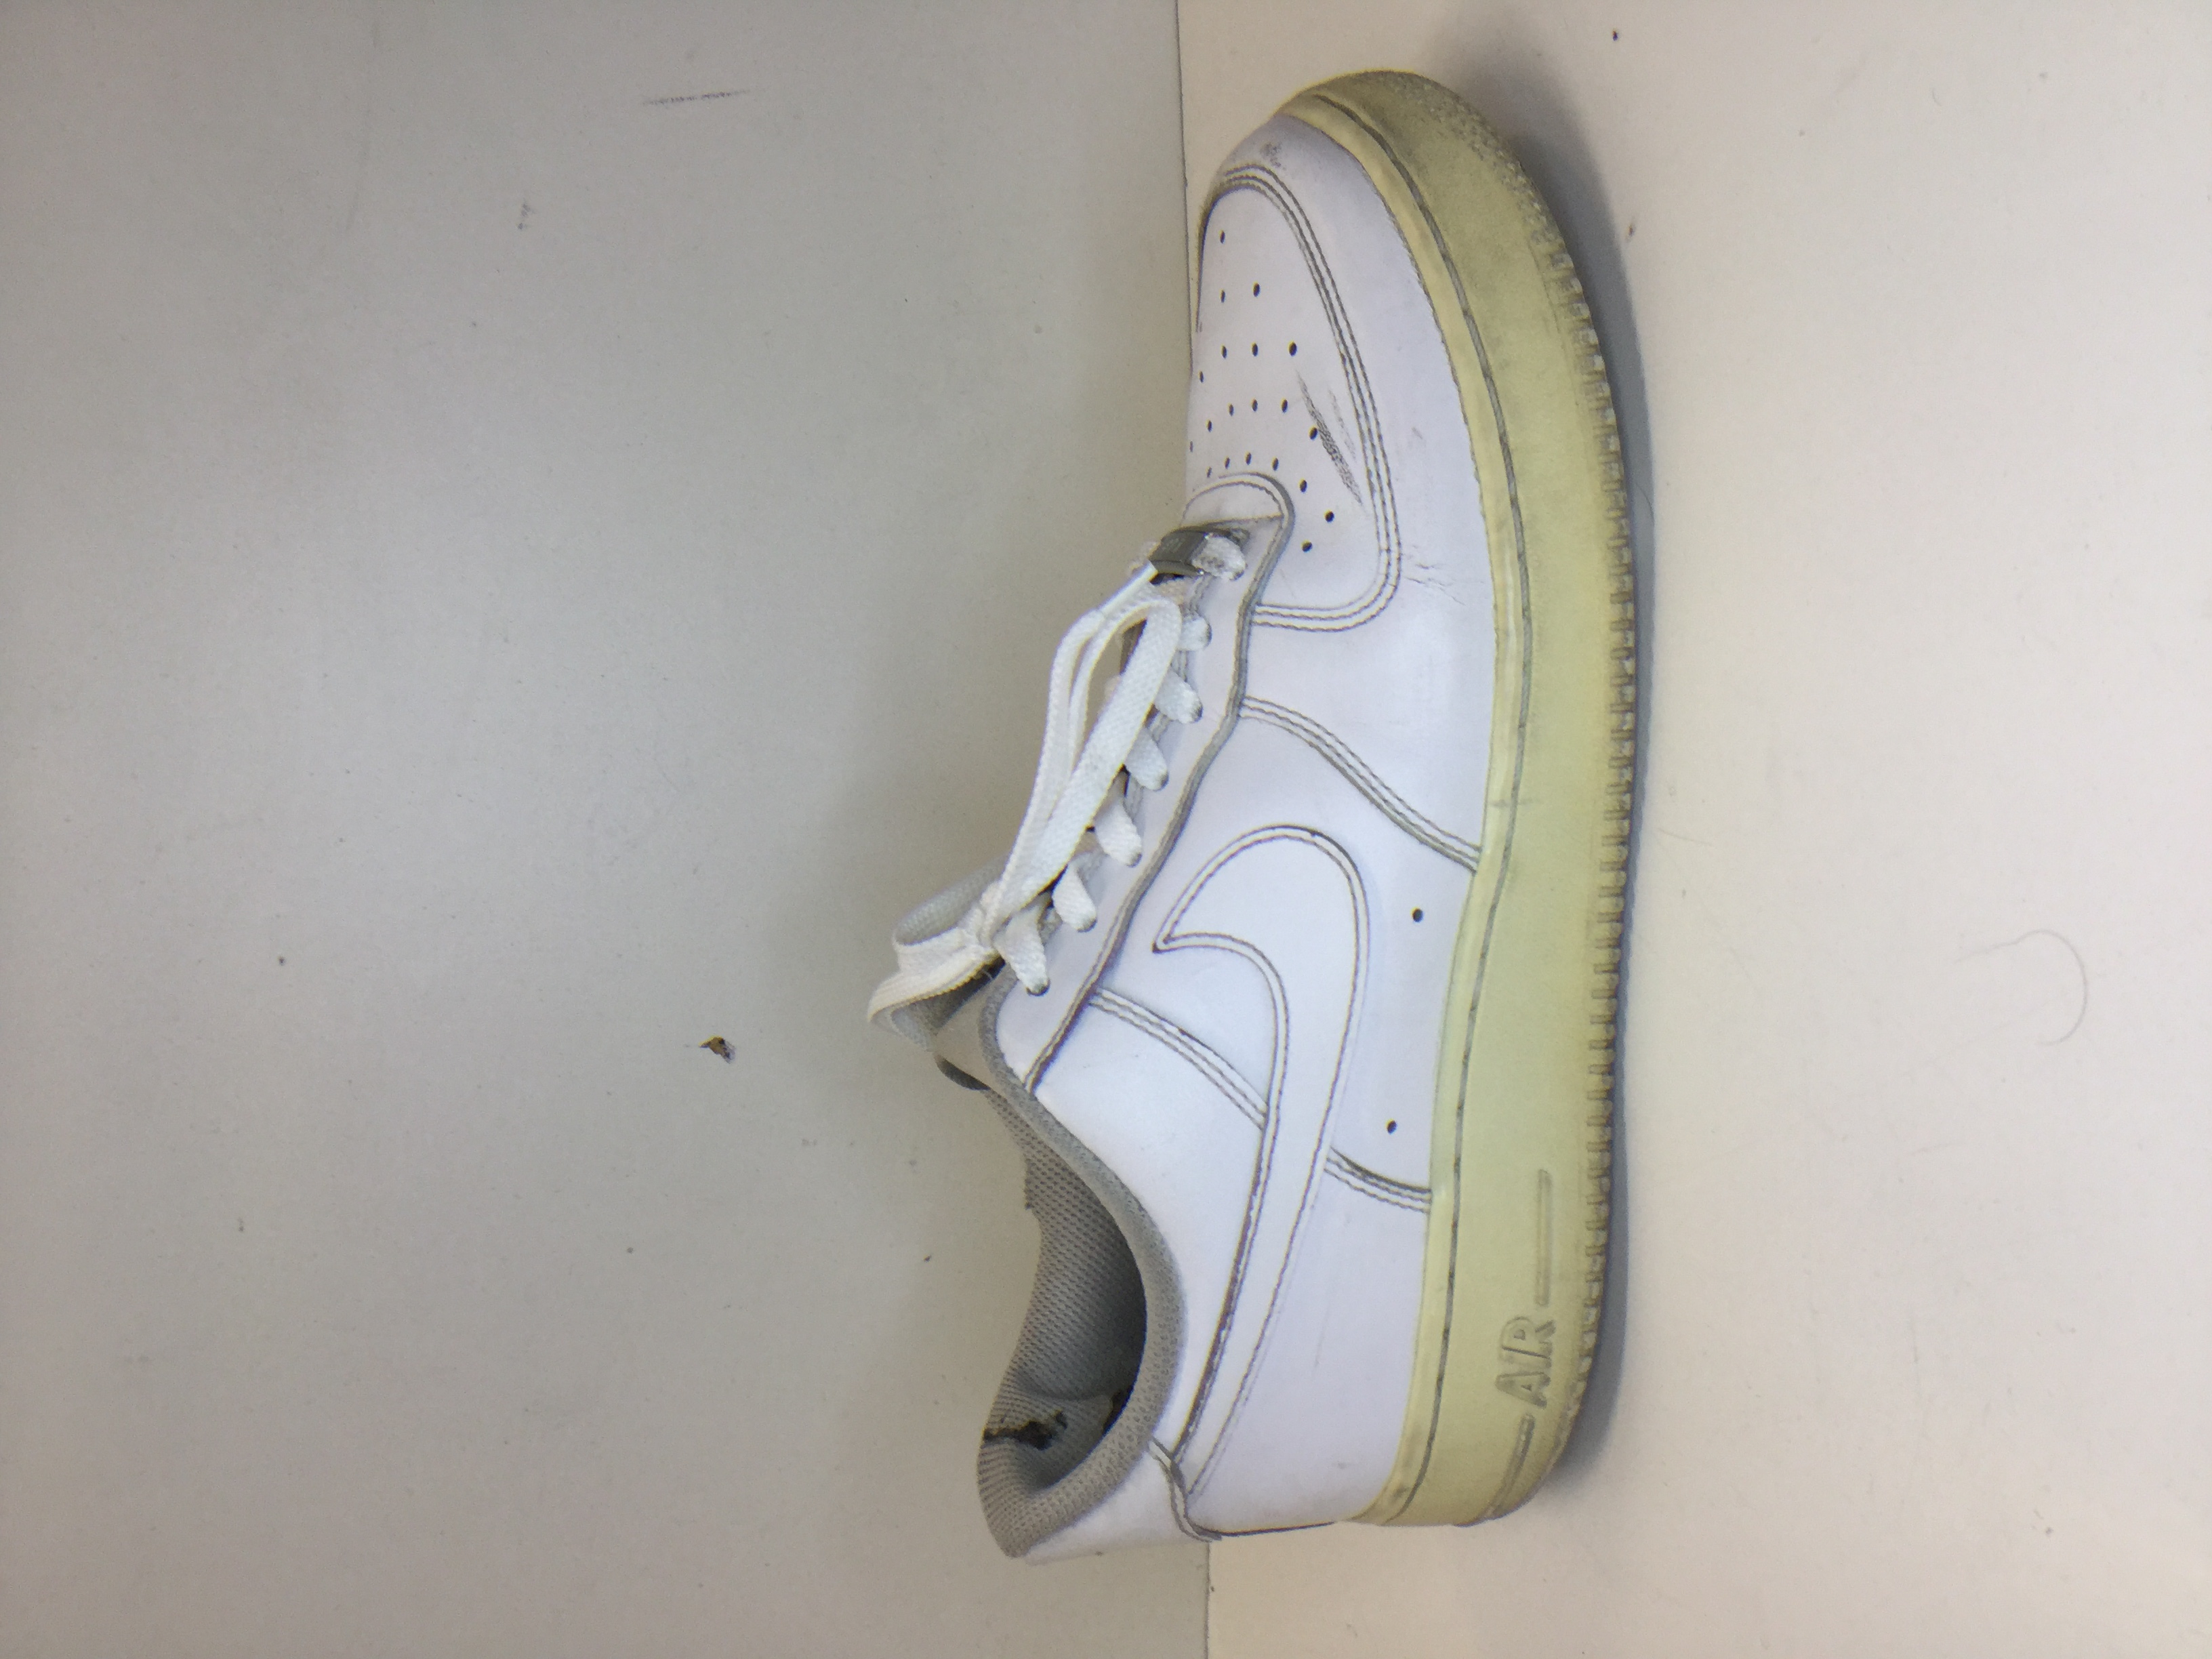 Buy the Nike Air Force 1 Triple White Shoes Sz 8.5 2017 Sneakers ...